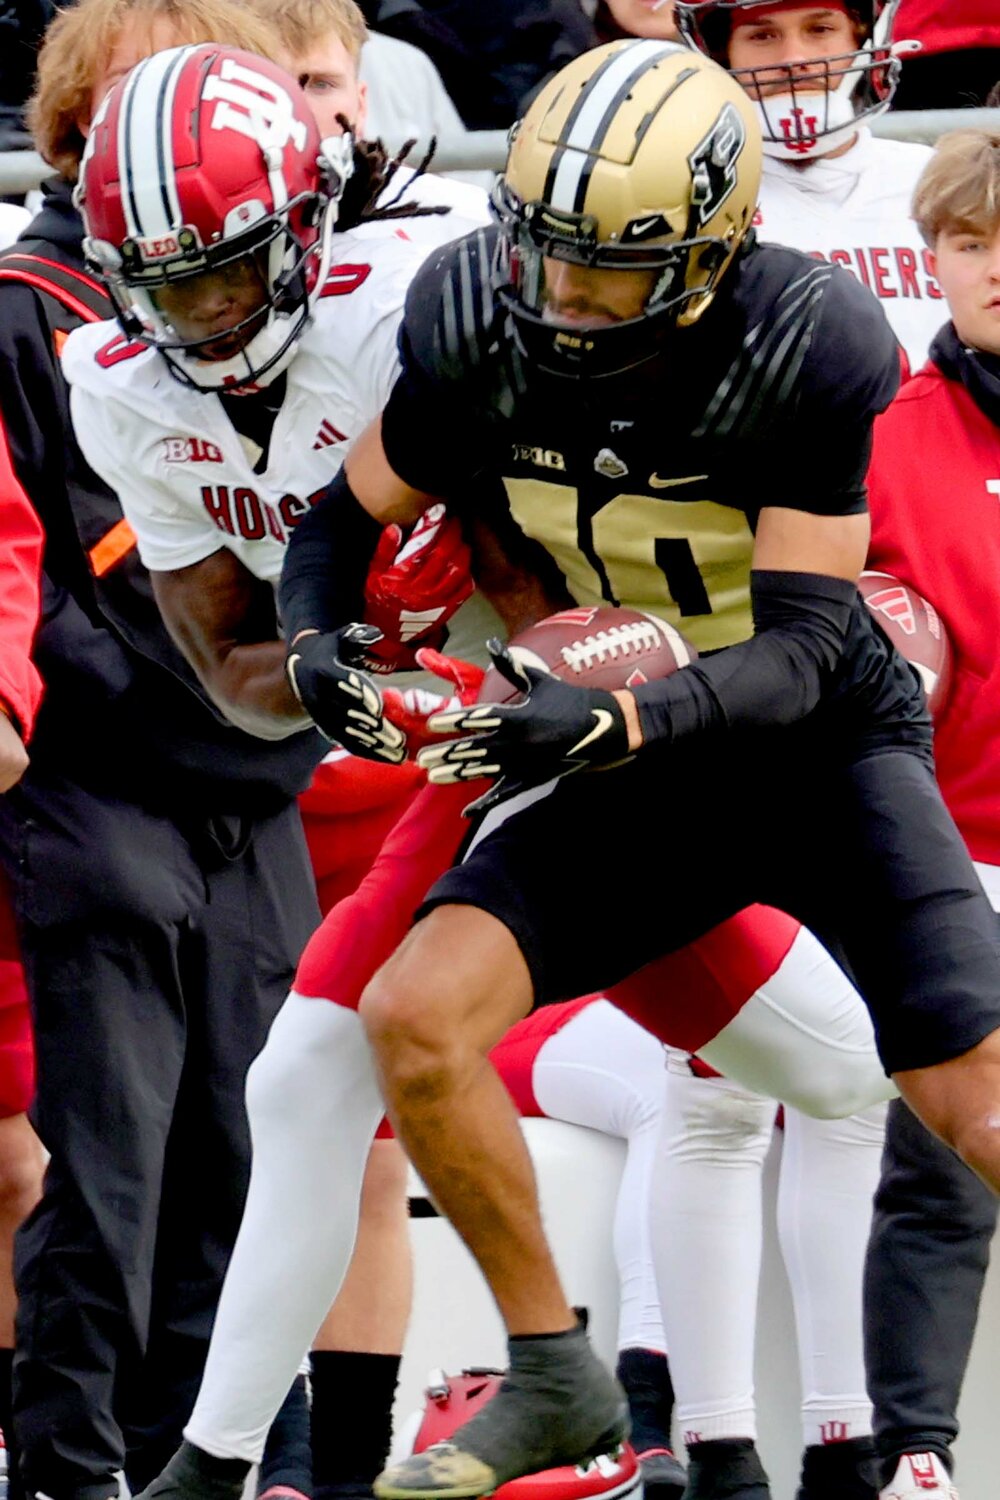 Cam Allen of Purdue - intercepting pass aimed at Andison Coby of Indiana